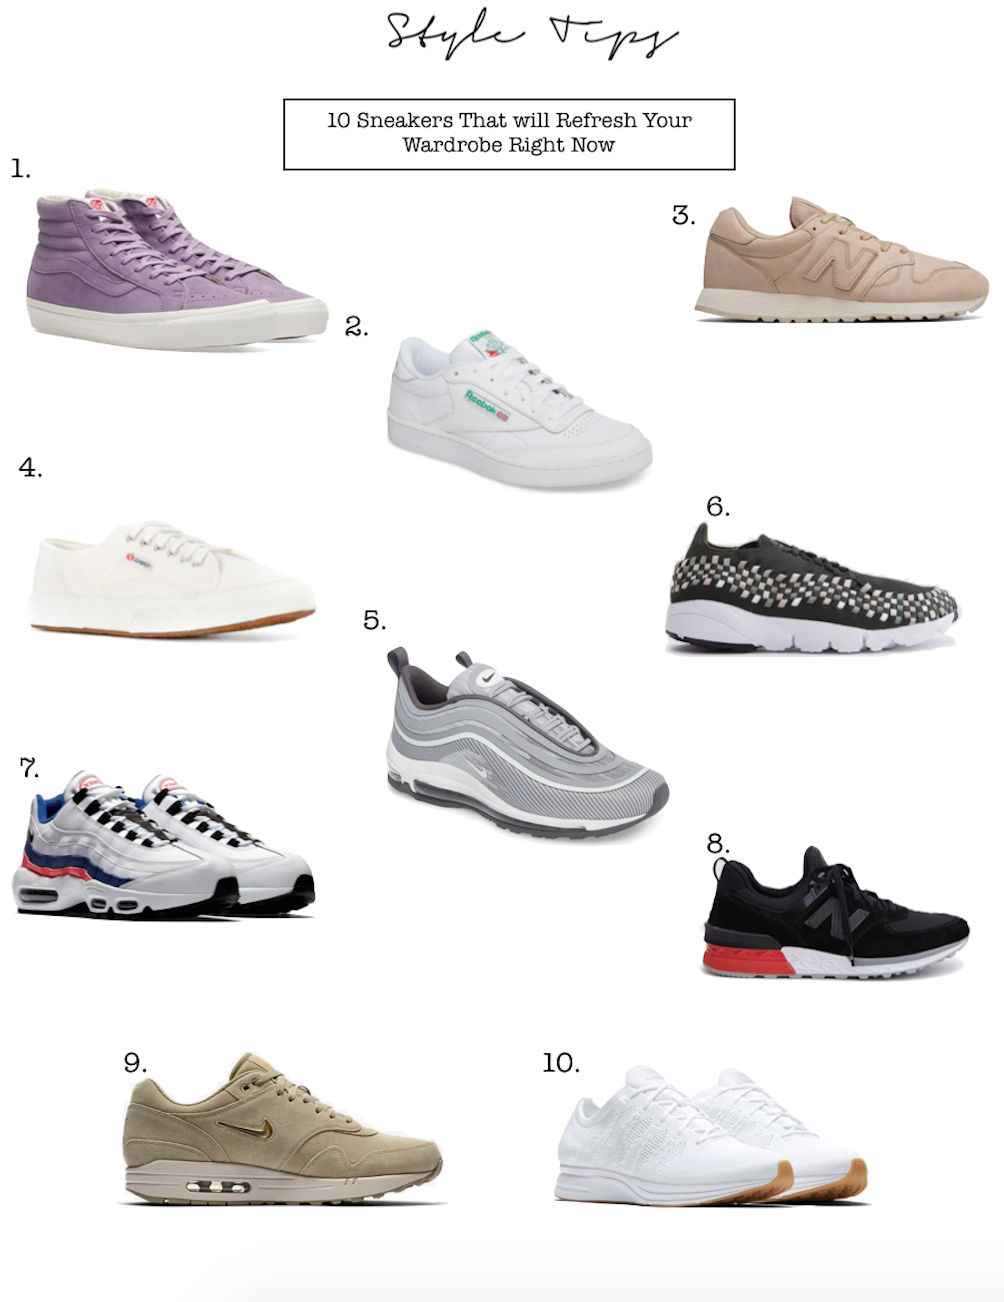 10 Sneakers That will Refresh Your Wardrobe